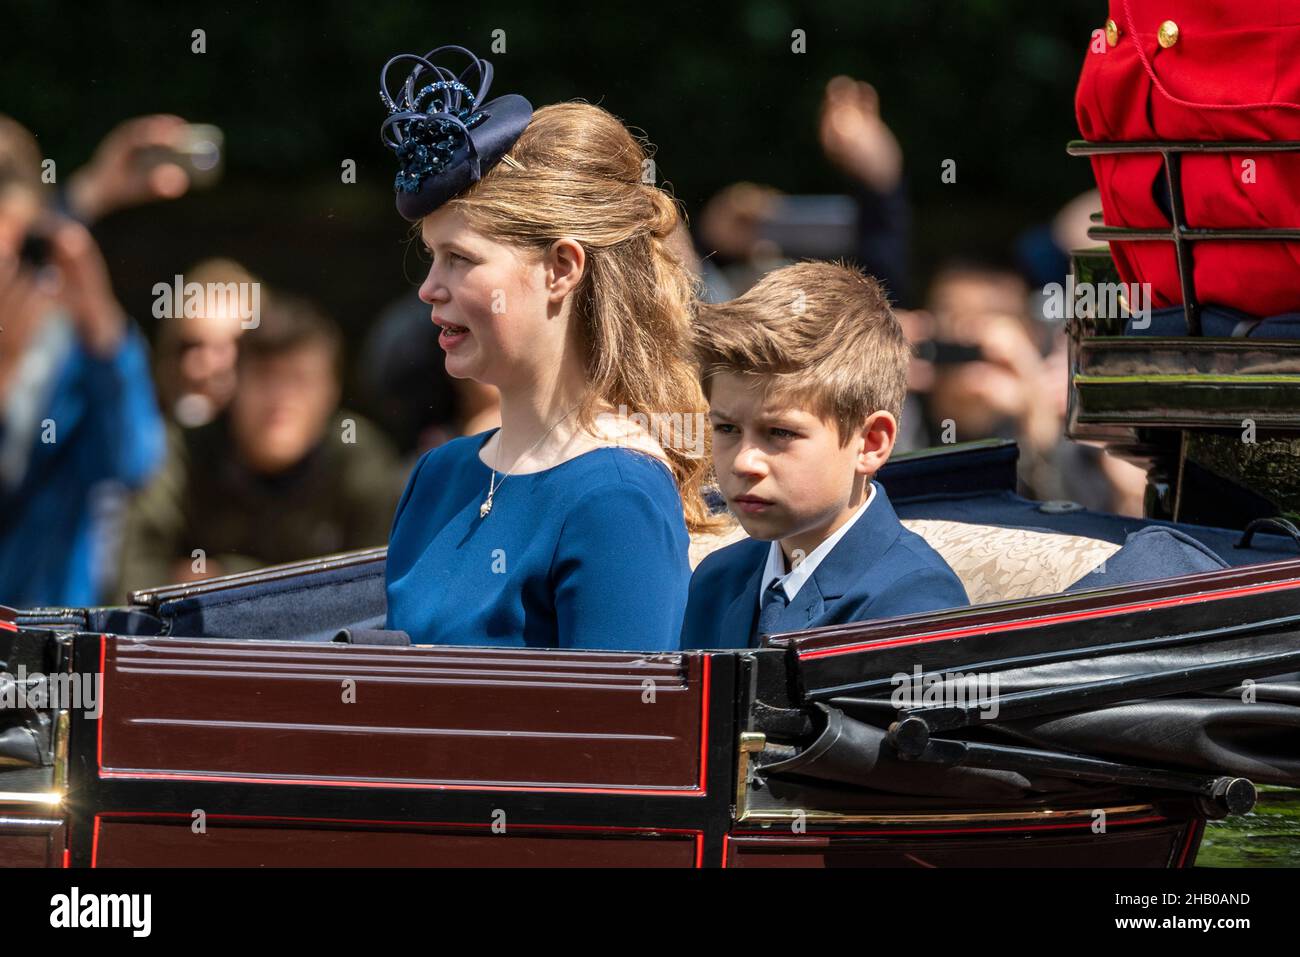 Lady Louise Windsor and James, Viscount Severn at Trooping the Colour 2019 in carriage on The Mall, London, UK. Children of Prince Edward and Sophie Stock Photo